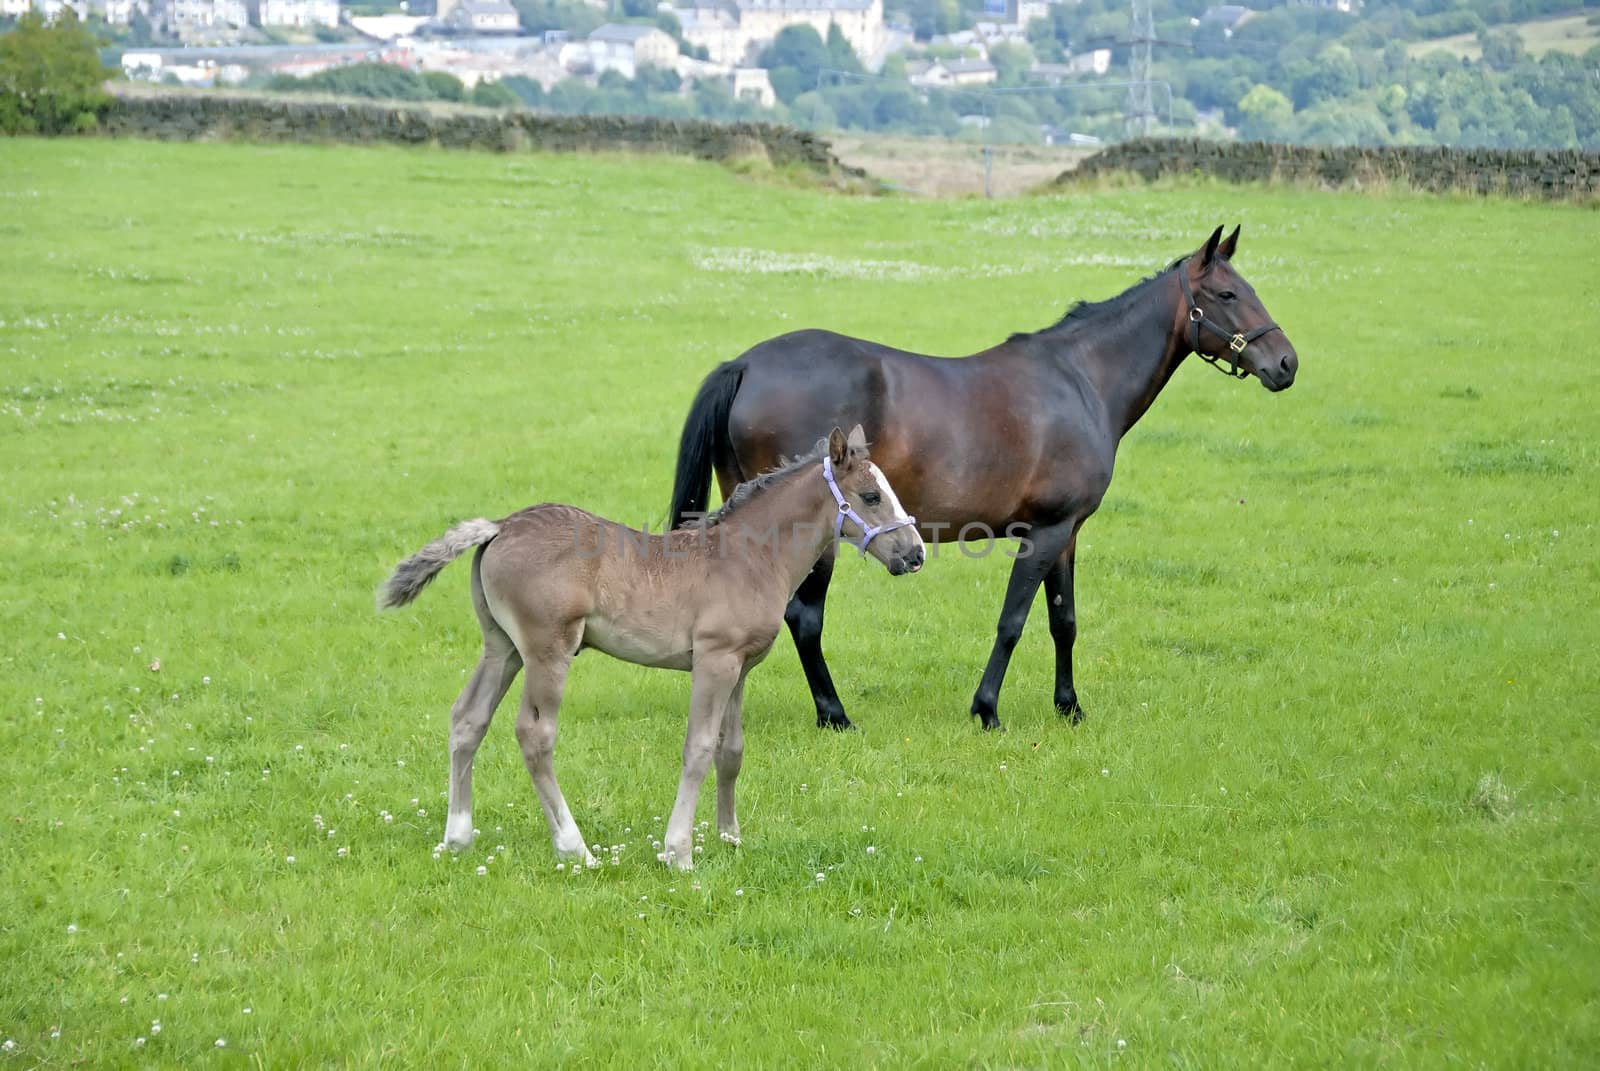 Chestnut Mare and Foal by d40xboy